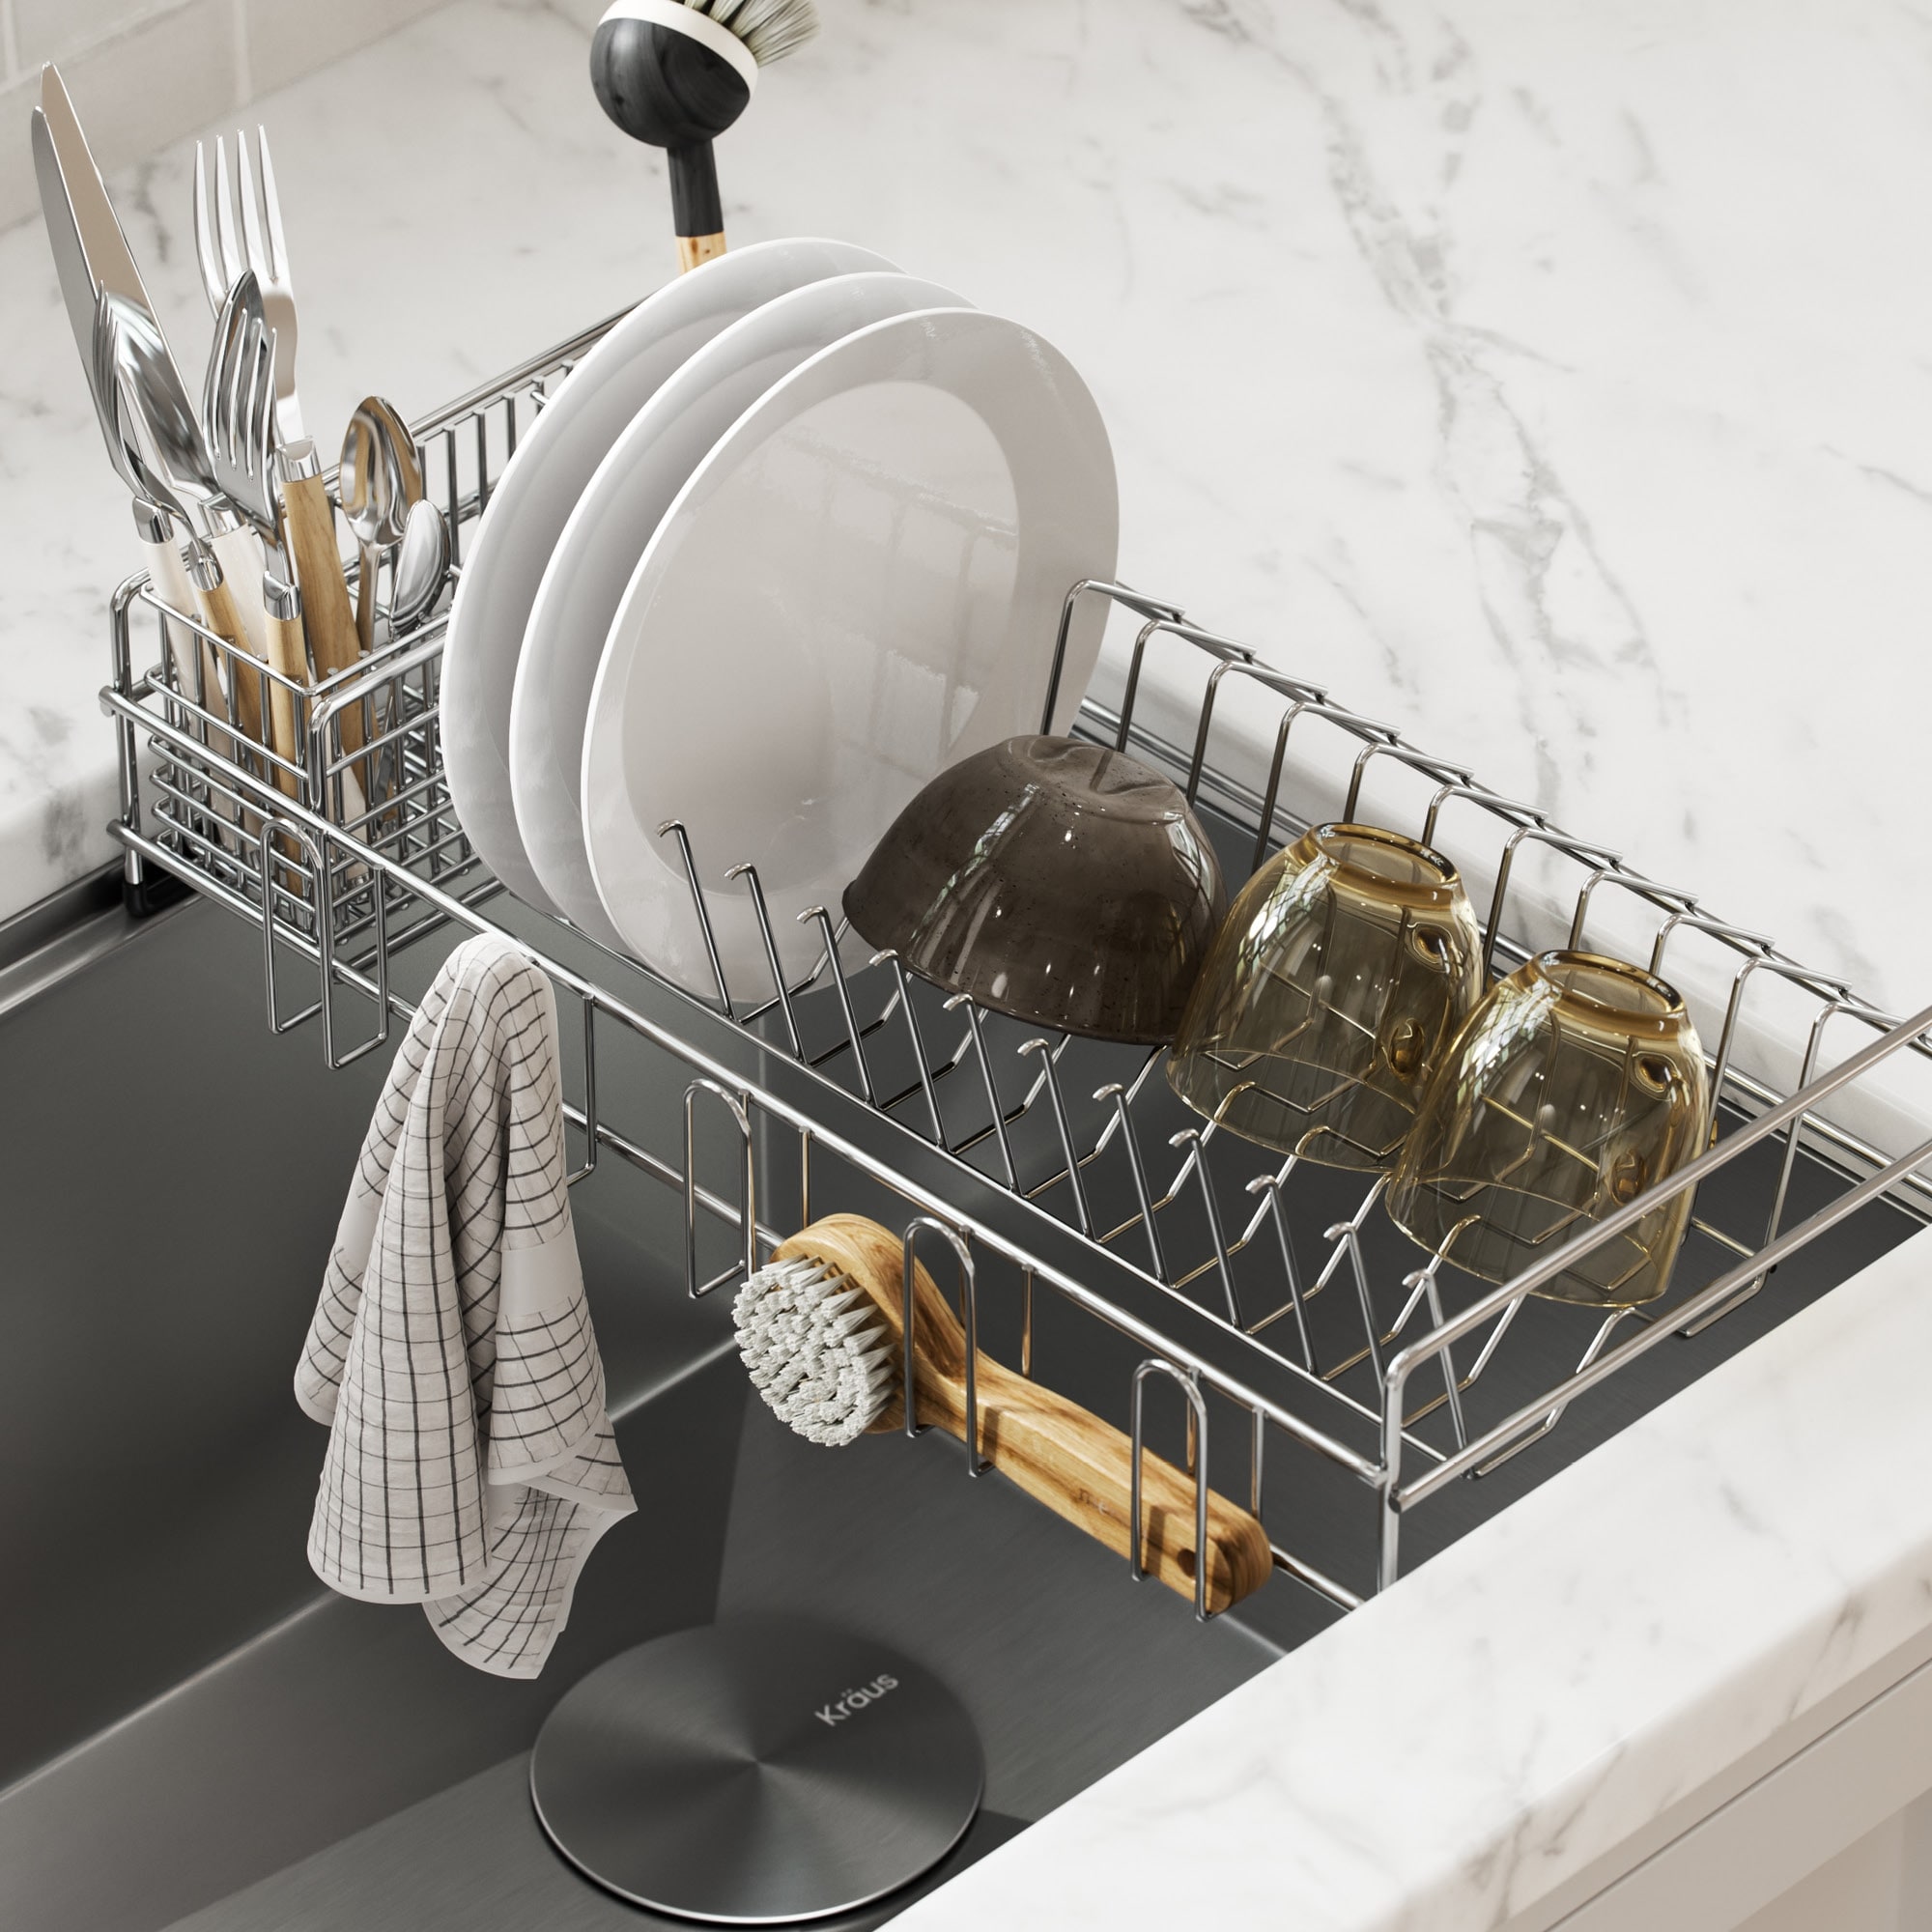 https://ak1.ostkcdn.com/images/products/is/images/direct/6e4ce715d39b6e1a2f638bb2d6125cdefcb92978/KRAUS-Workstation-Kitchen-Sink-Dish-Drying-Rack-Drainer-Utensil-Holder.jpg